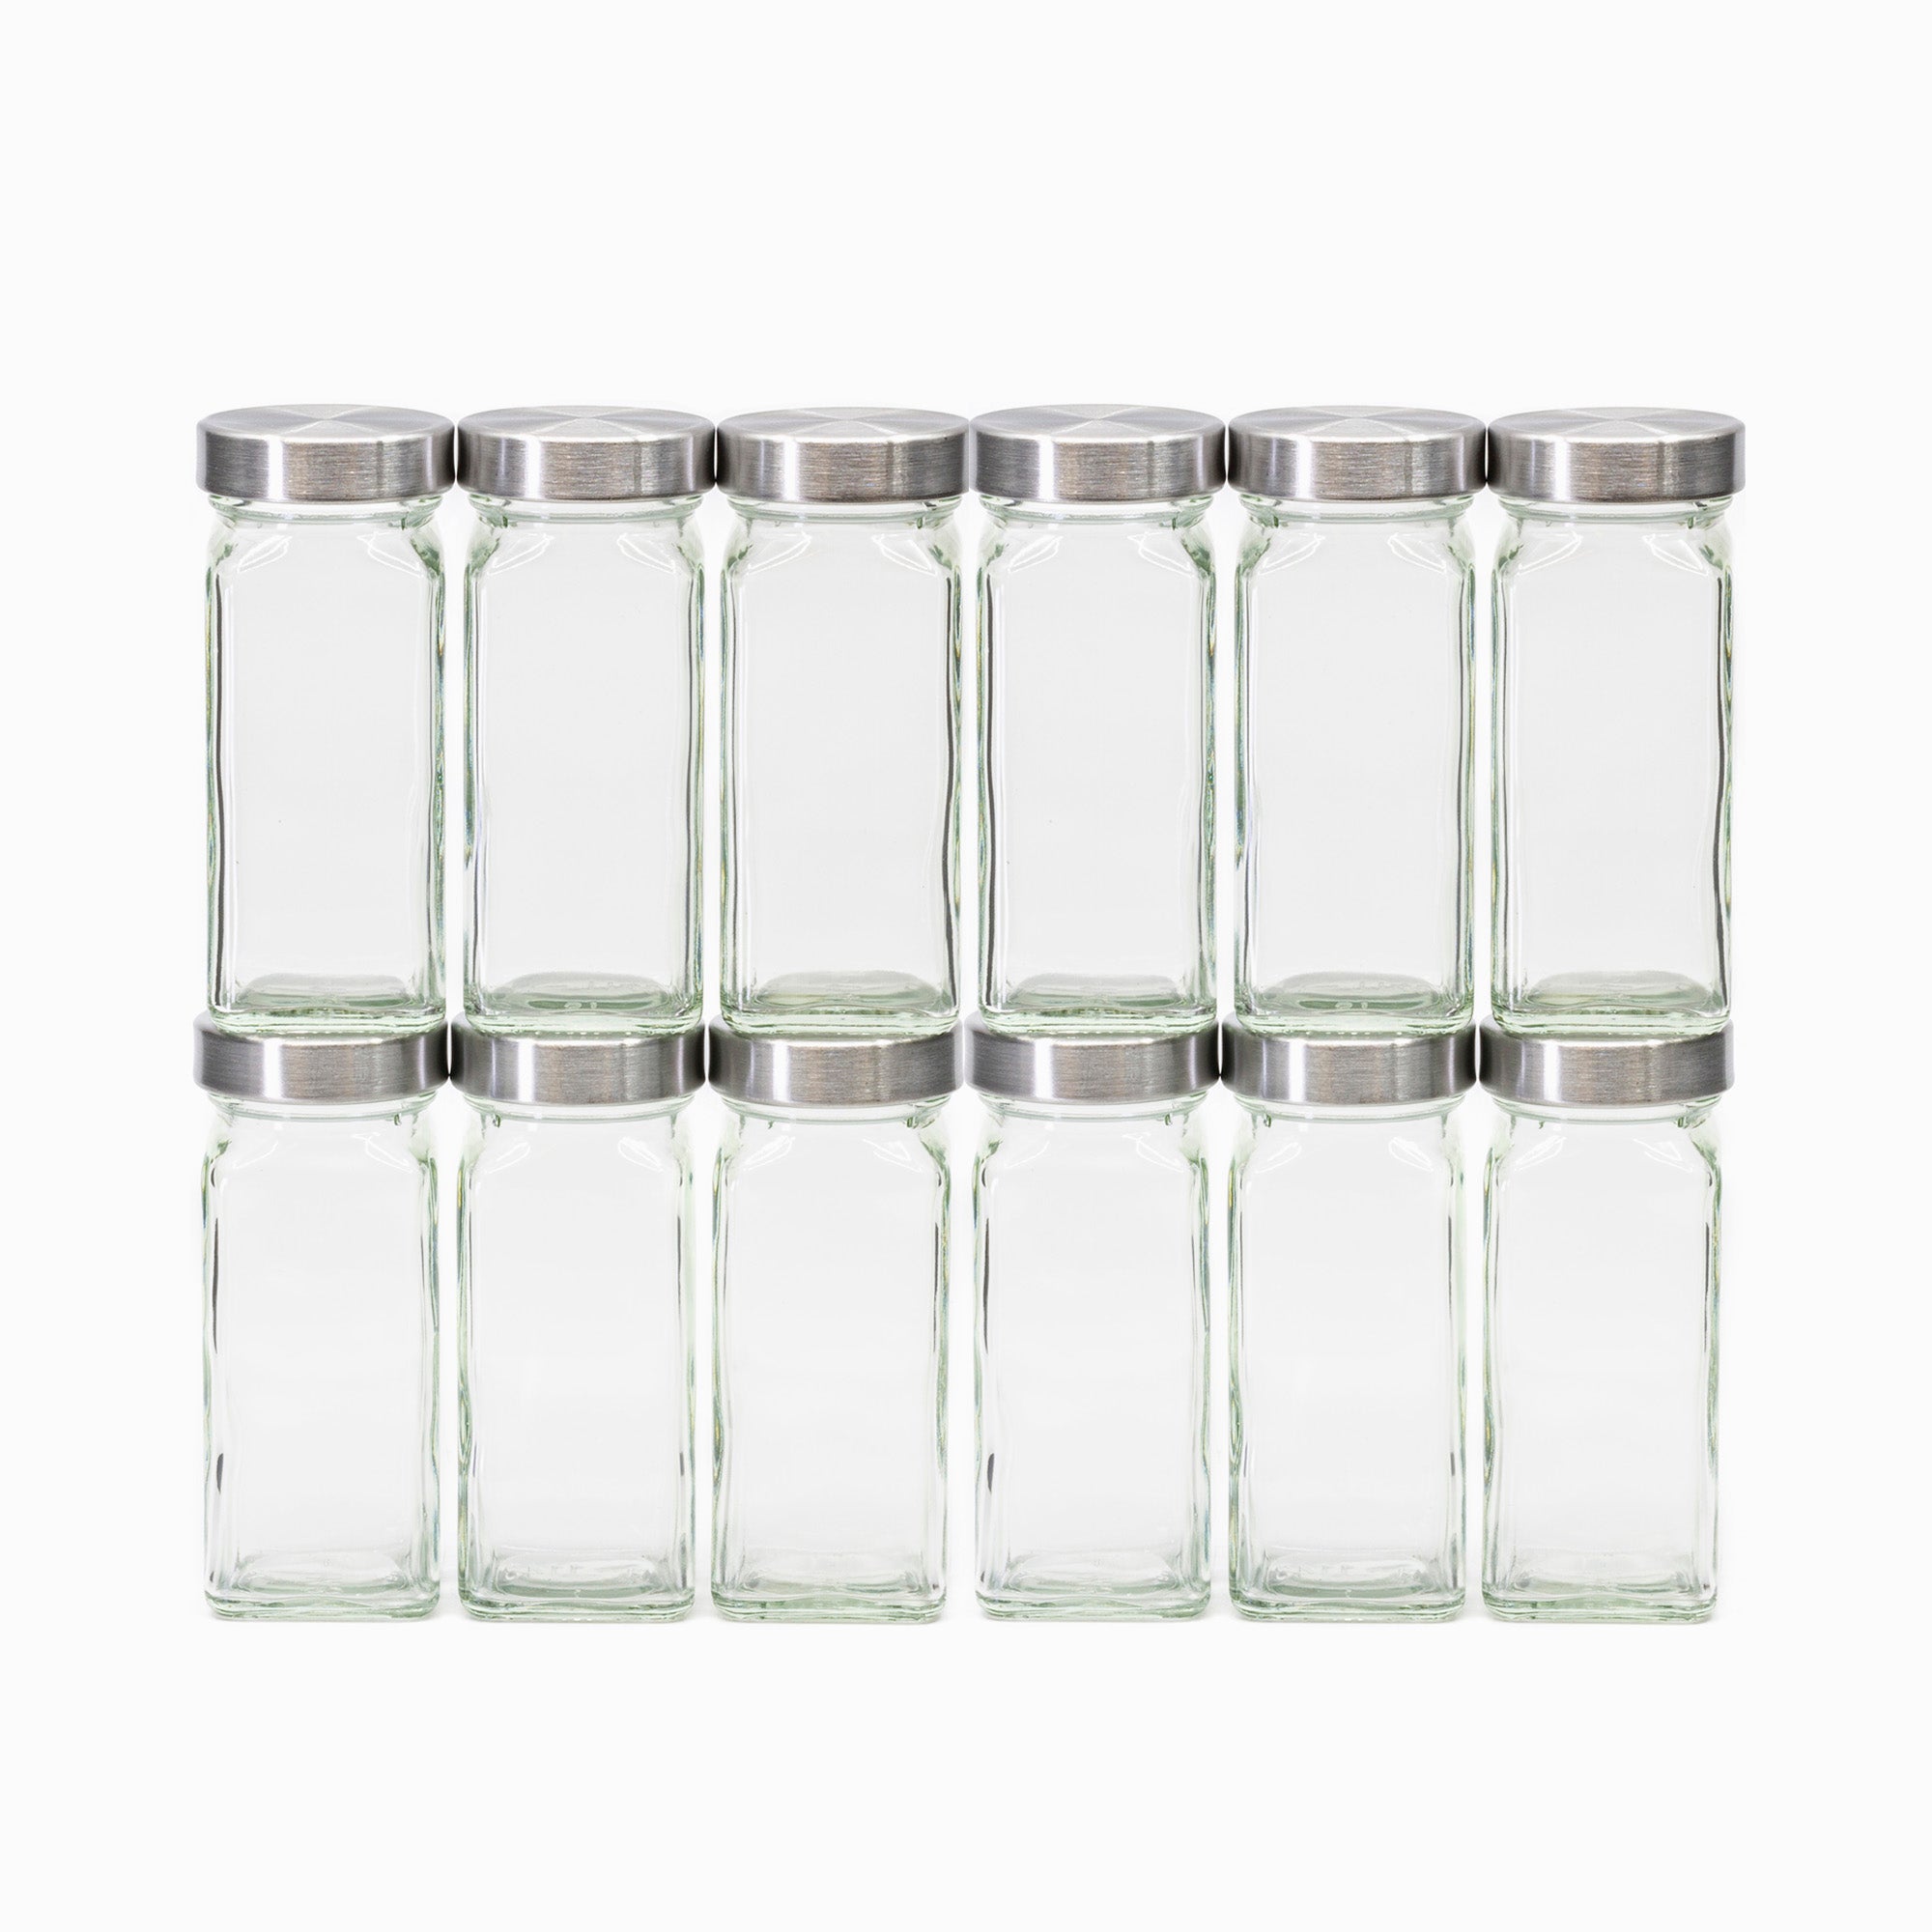 14 Glass Spice Jars w/2 Types of Preprinted Spice Labels. Commercial Grade,  Complete Set: 14 Square Empty Jars 4oz, Pour/Sift & Coarse Shakers